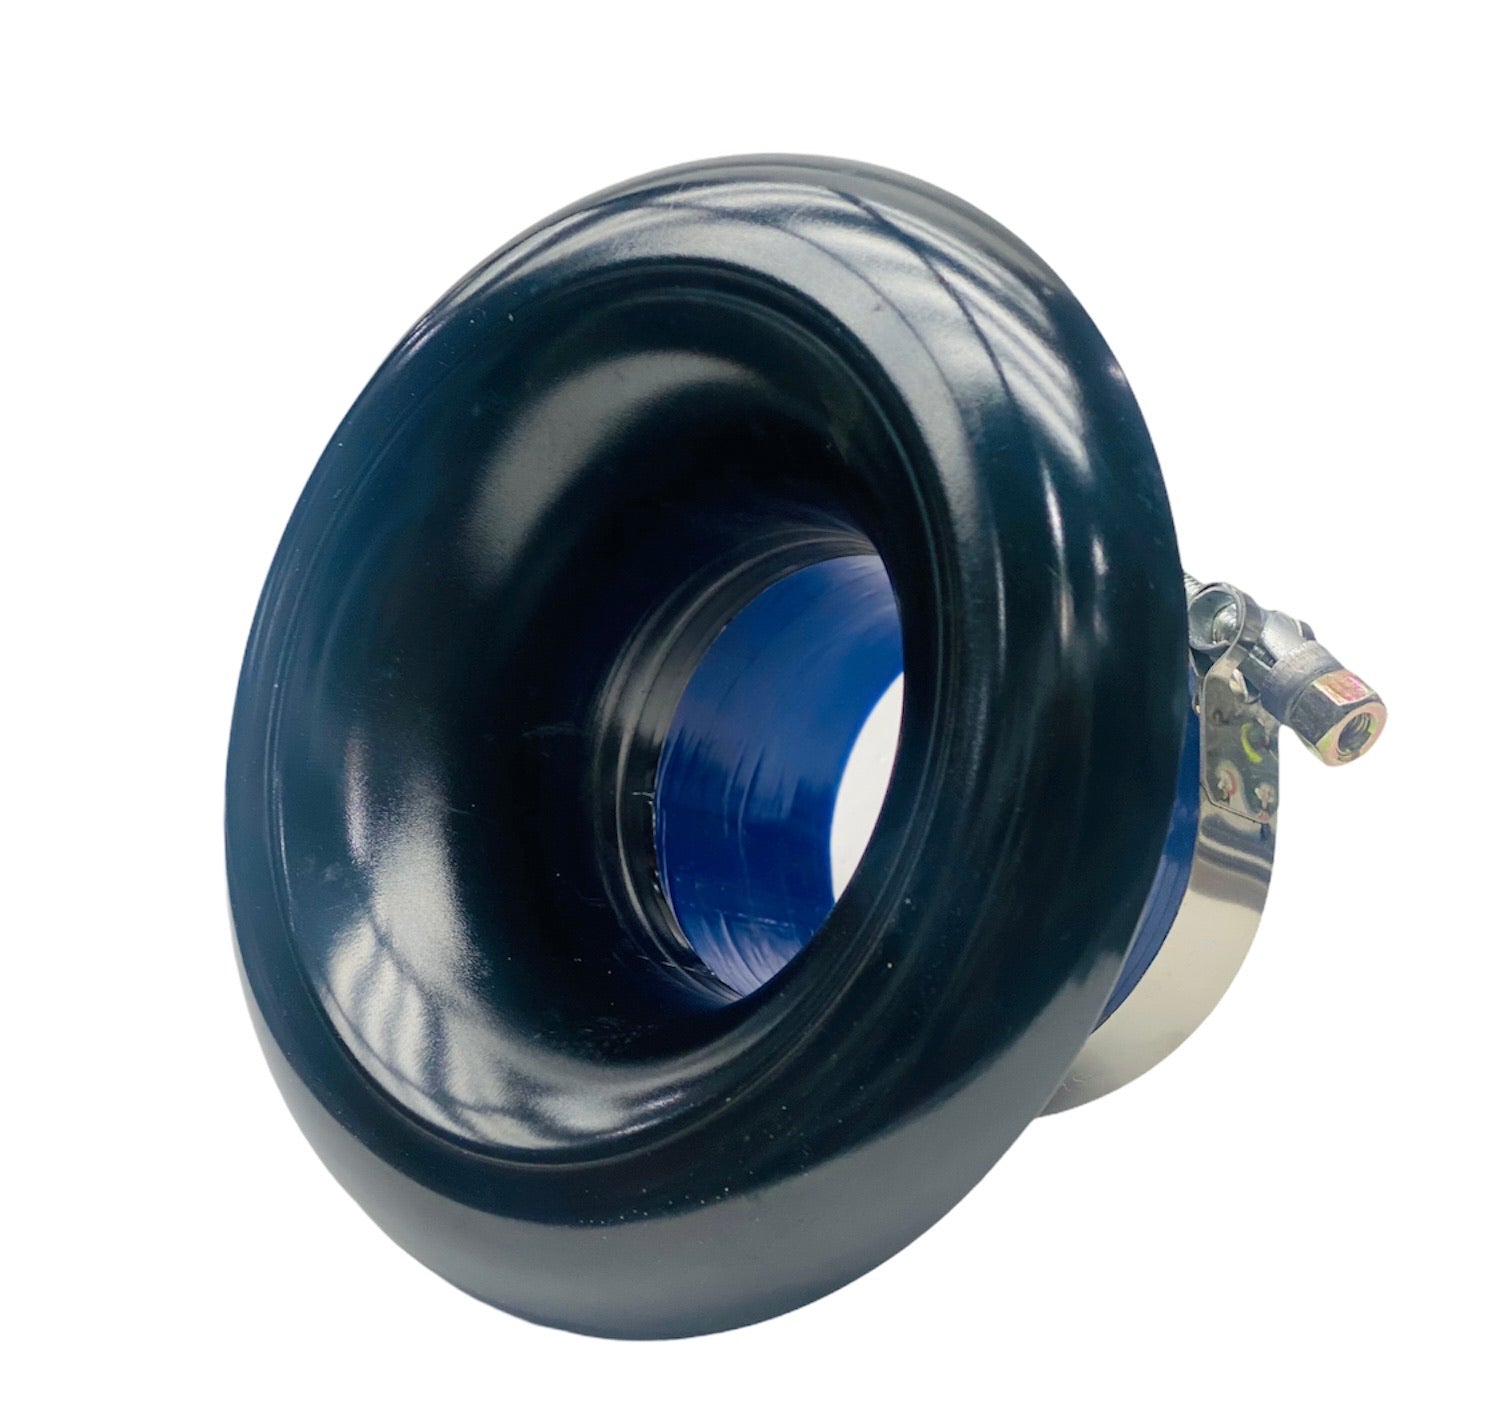 VELOCITY STACK TURBO INLET HORN